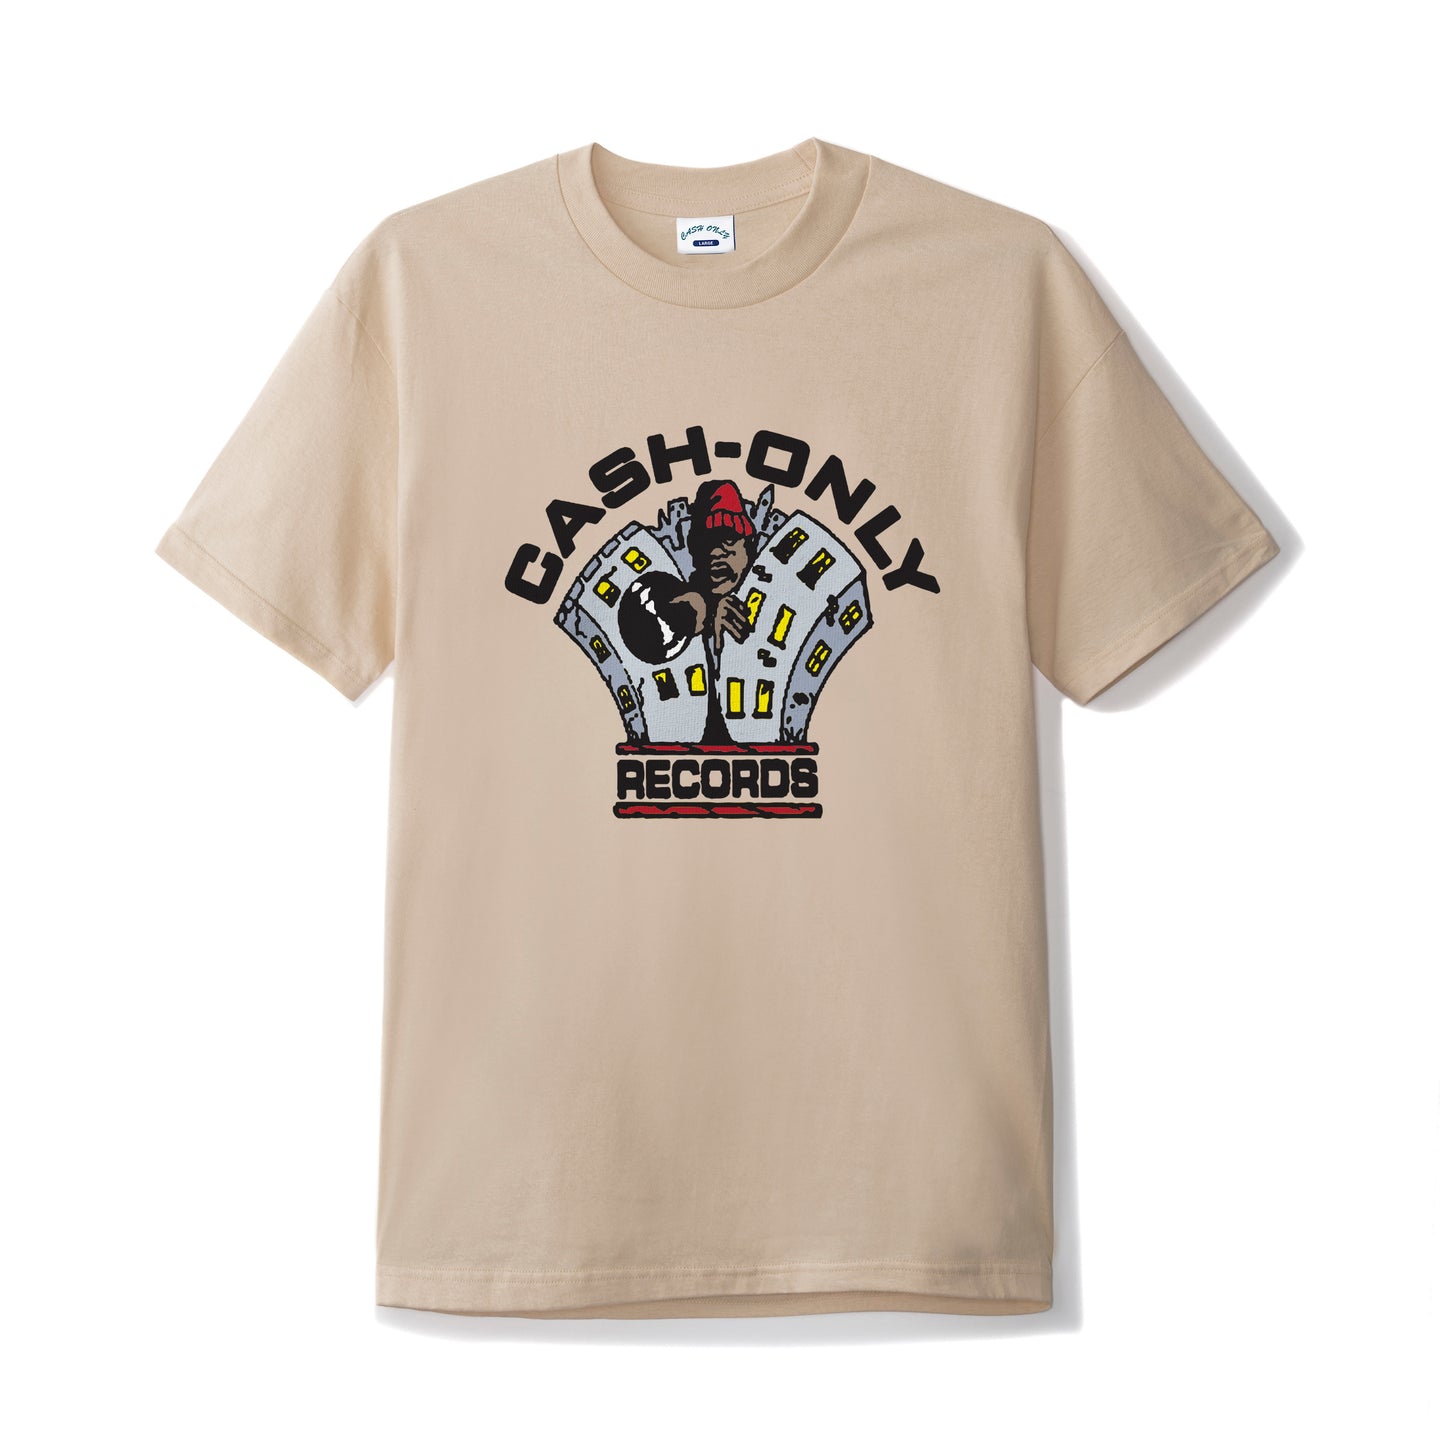 Cash Only Drop 6 Records T-Shirt Sand